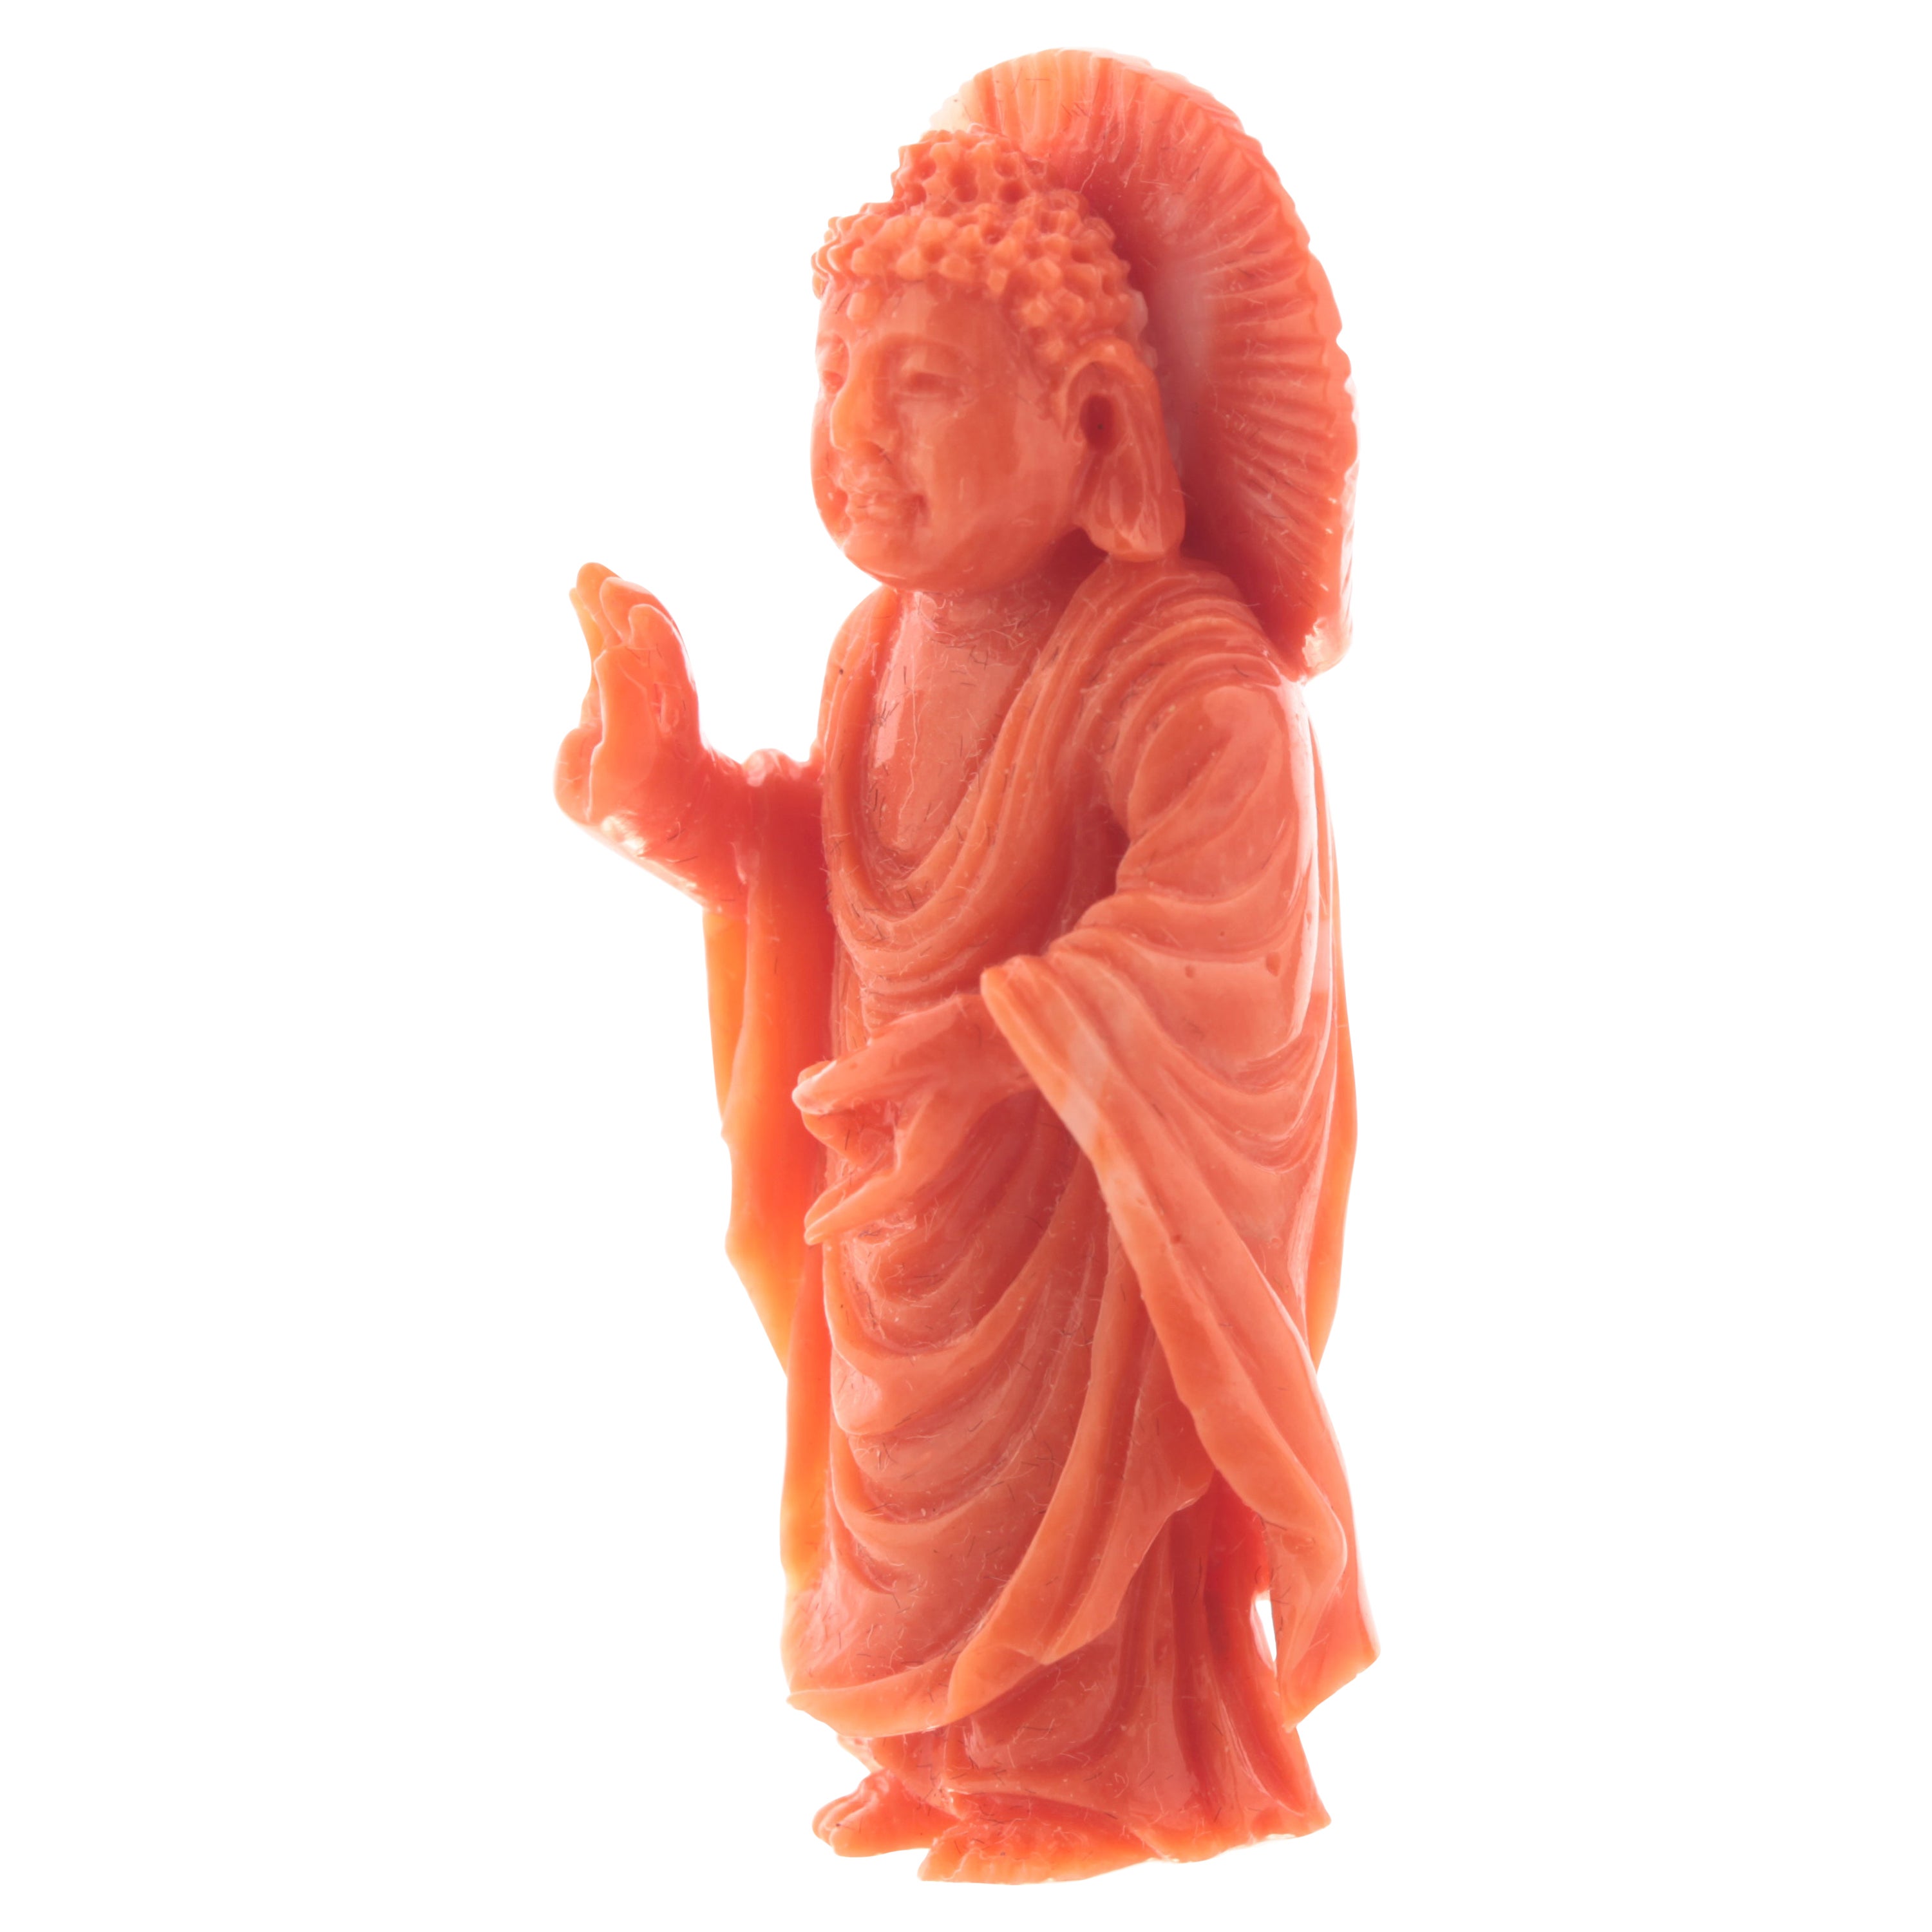 Buddhist Monk Carved Asian Decorative Art Statue Sculpture Natural Red Coral For Sale